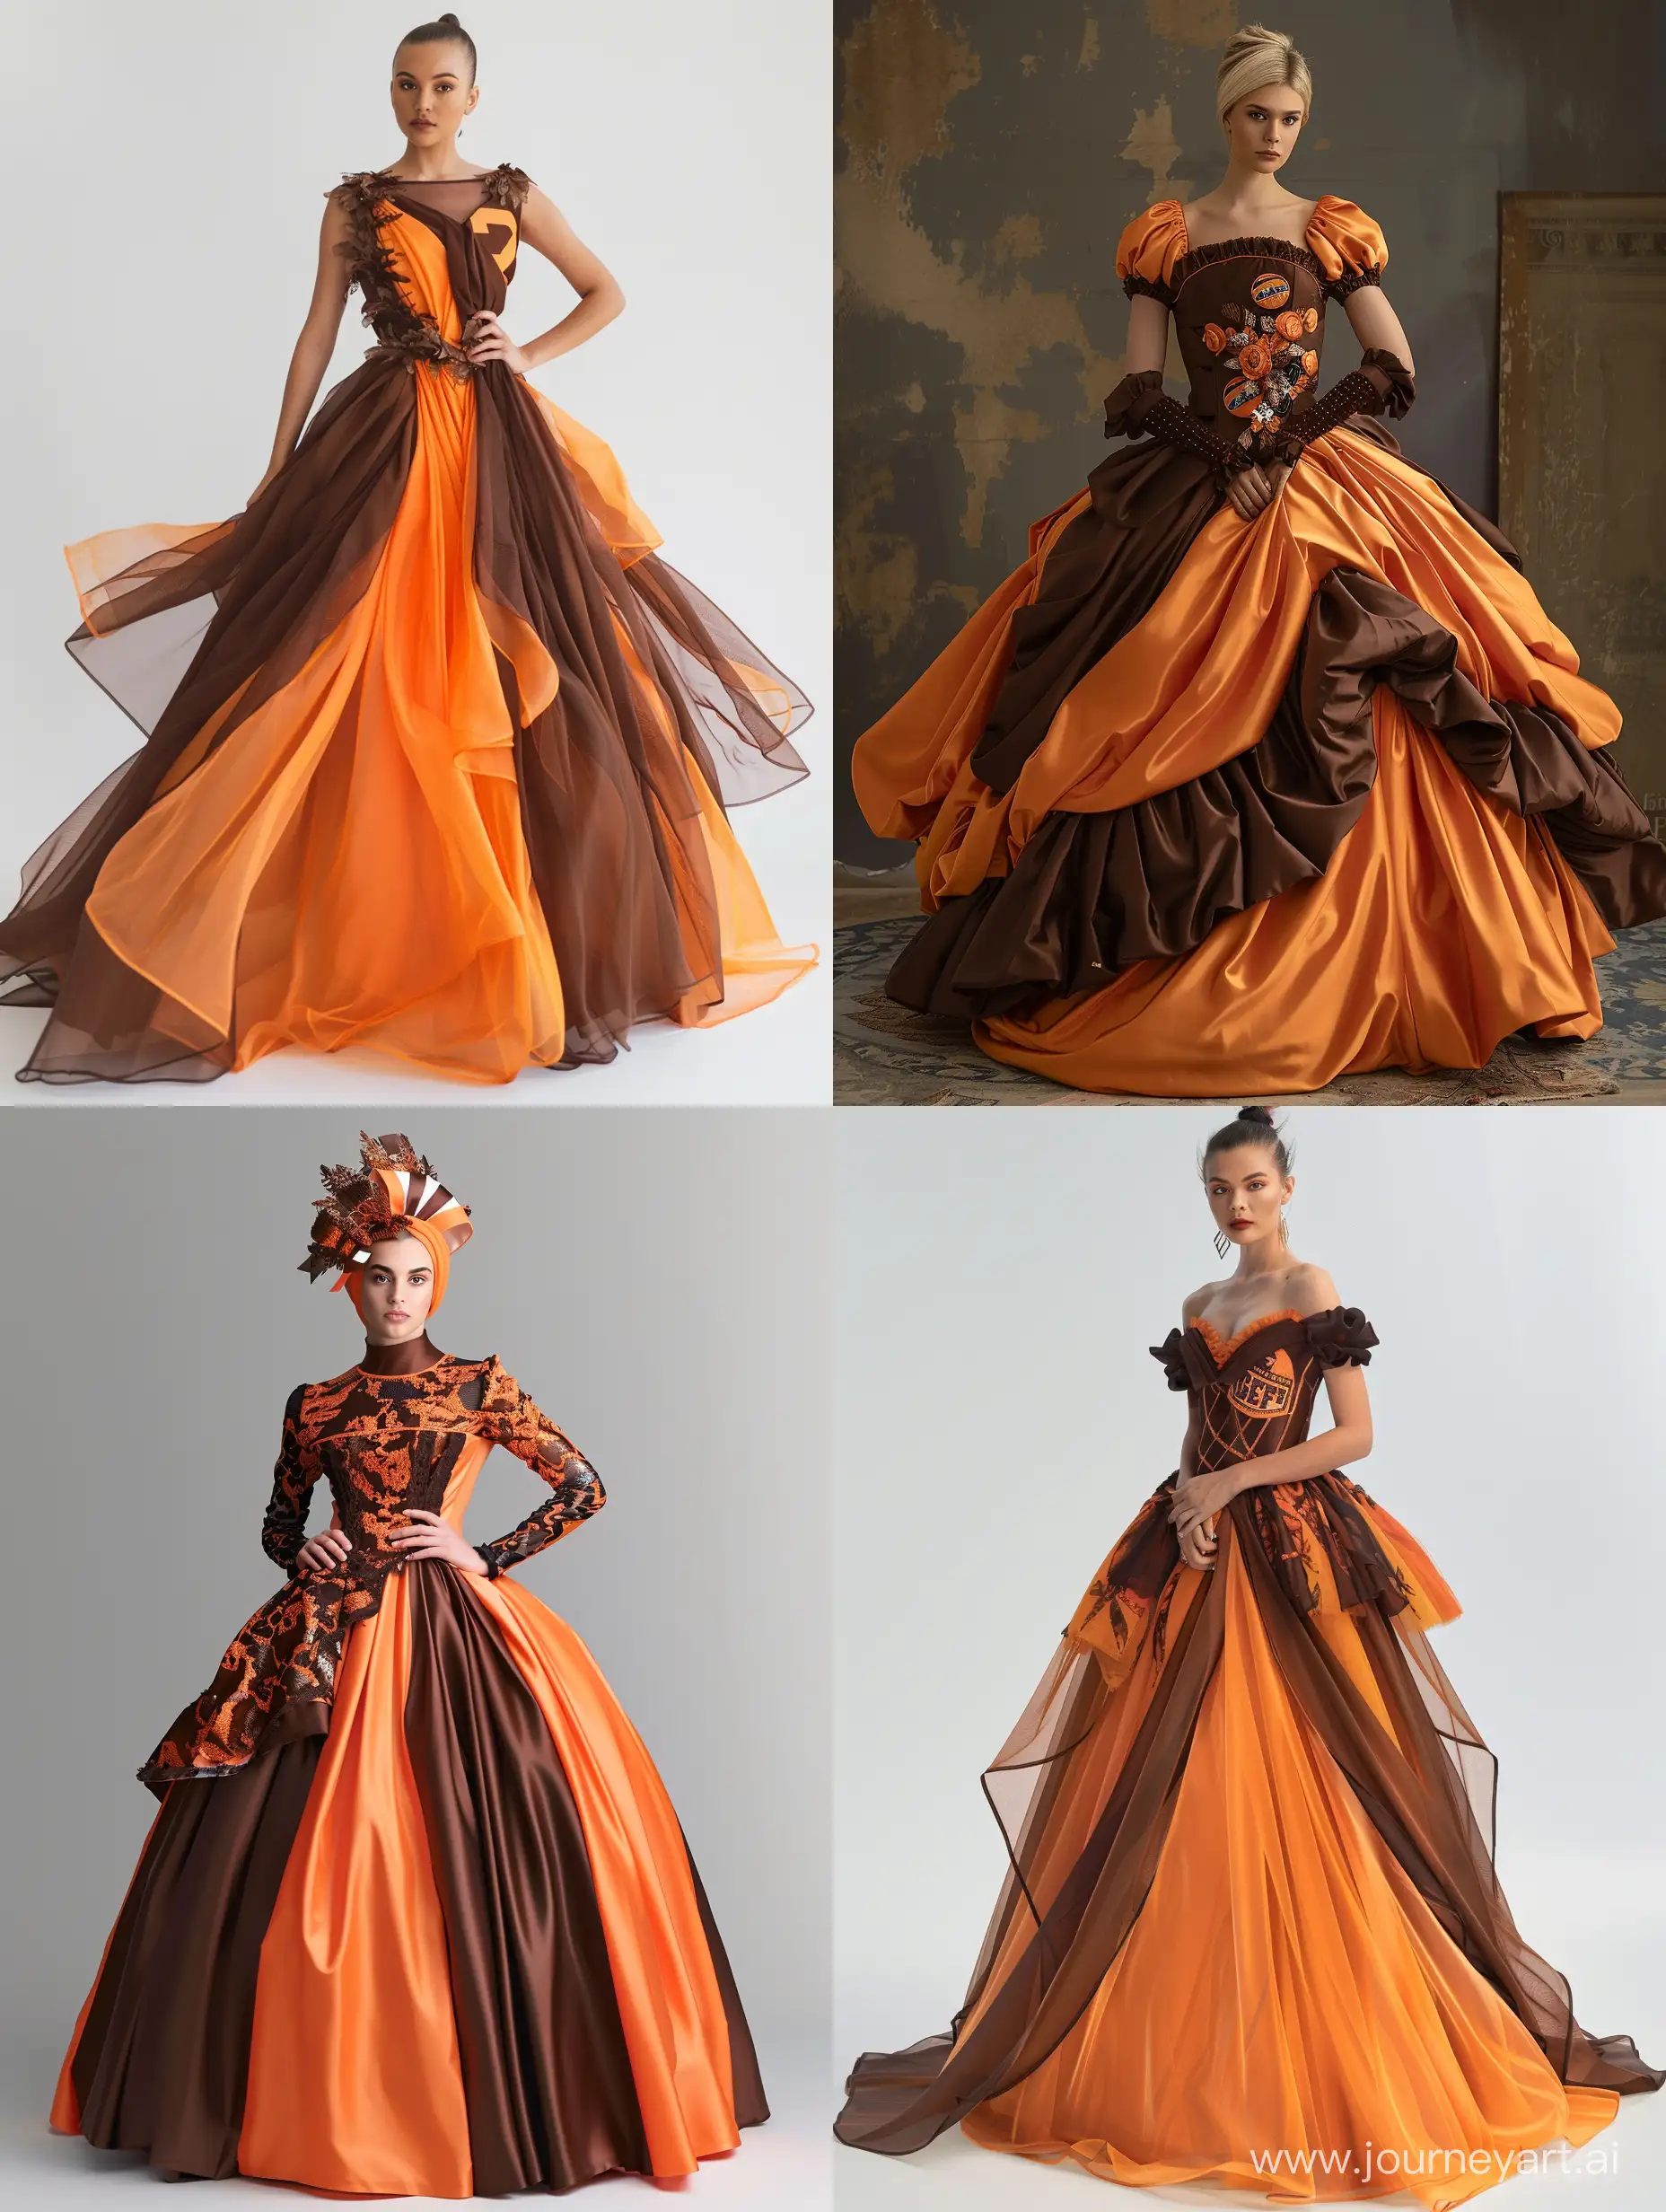 woman wearing a Cleveland Browns inspired ball gown. Orange and brown.